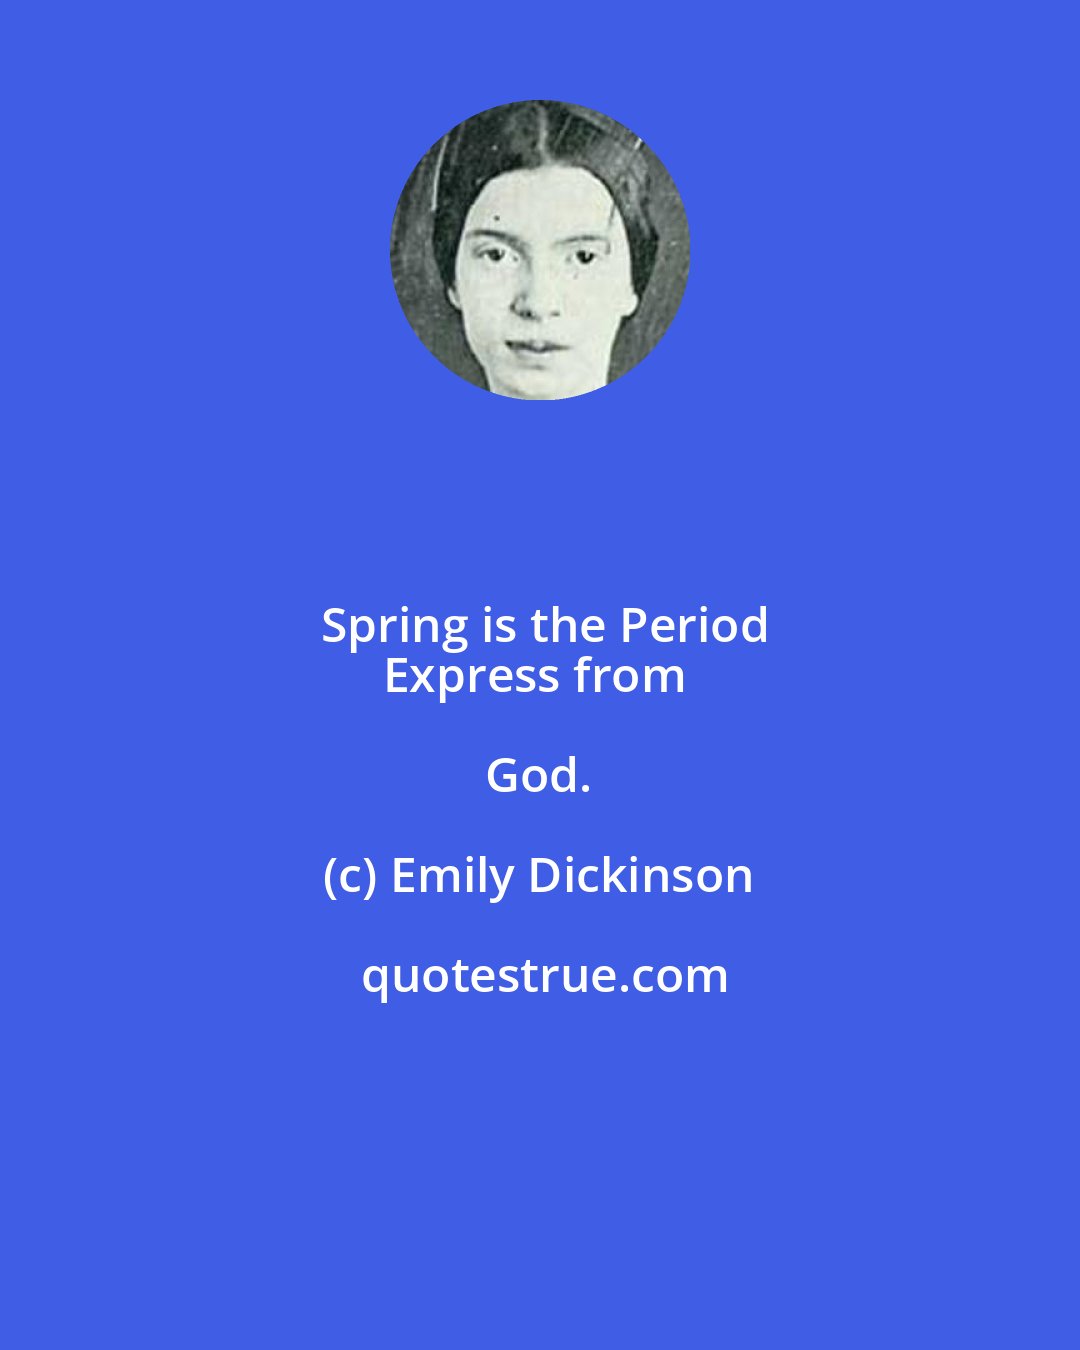 Emily Dickinson: Spring is the Period
Express from God.